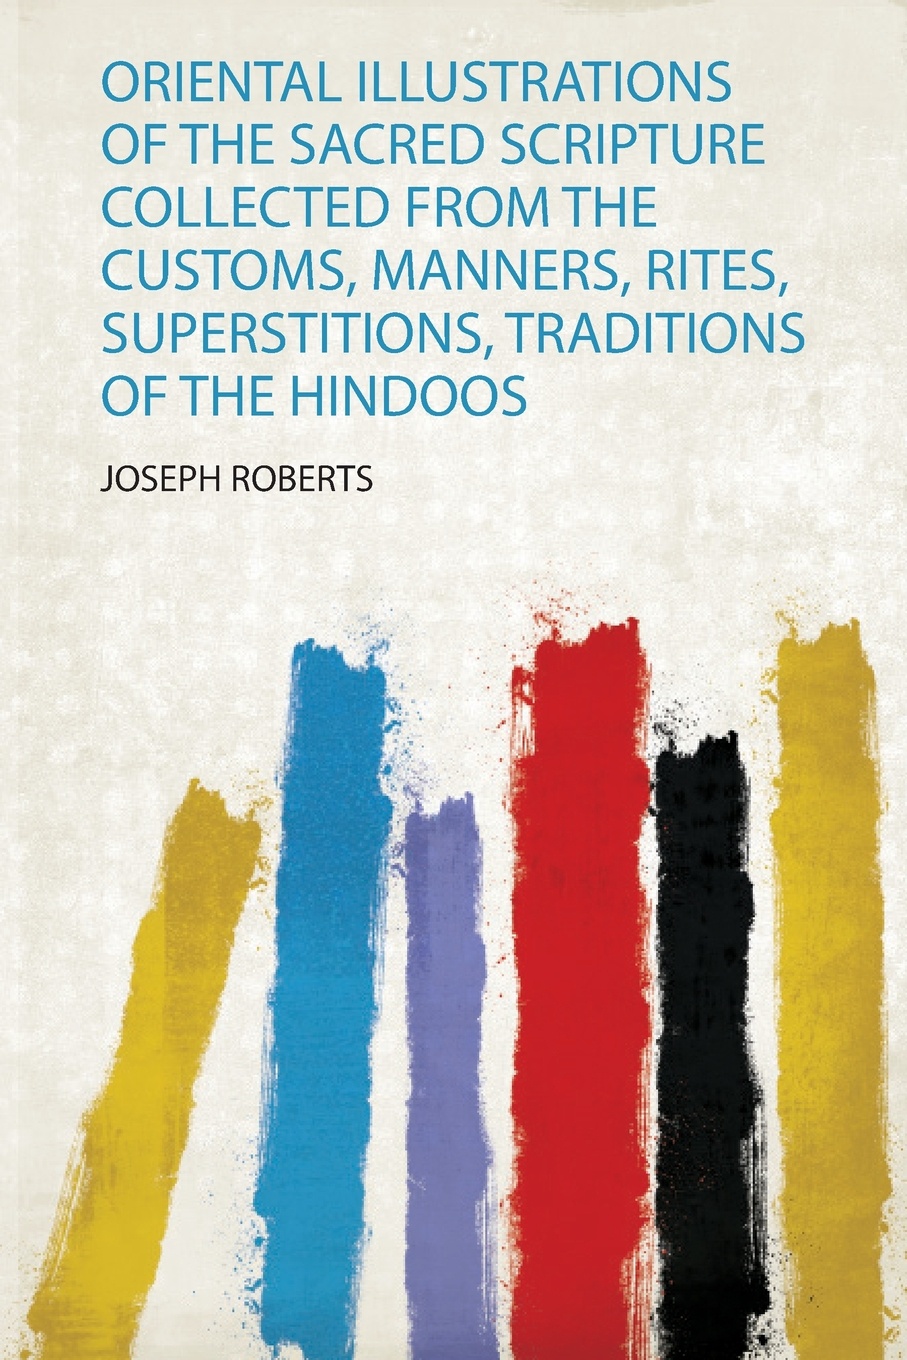 Oriental Illustrations of the Sacred Scripture Collected from the Customs, Manners, Rites, Superstitions, Traditions of the Hindoos